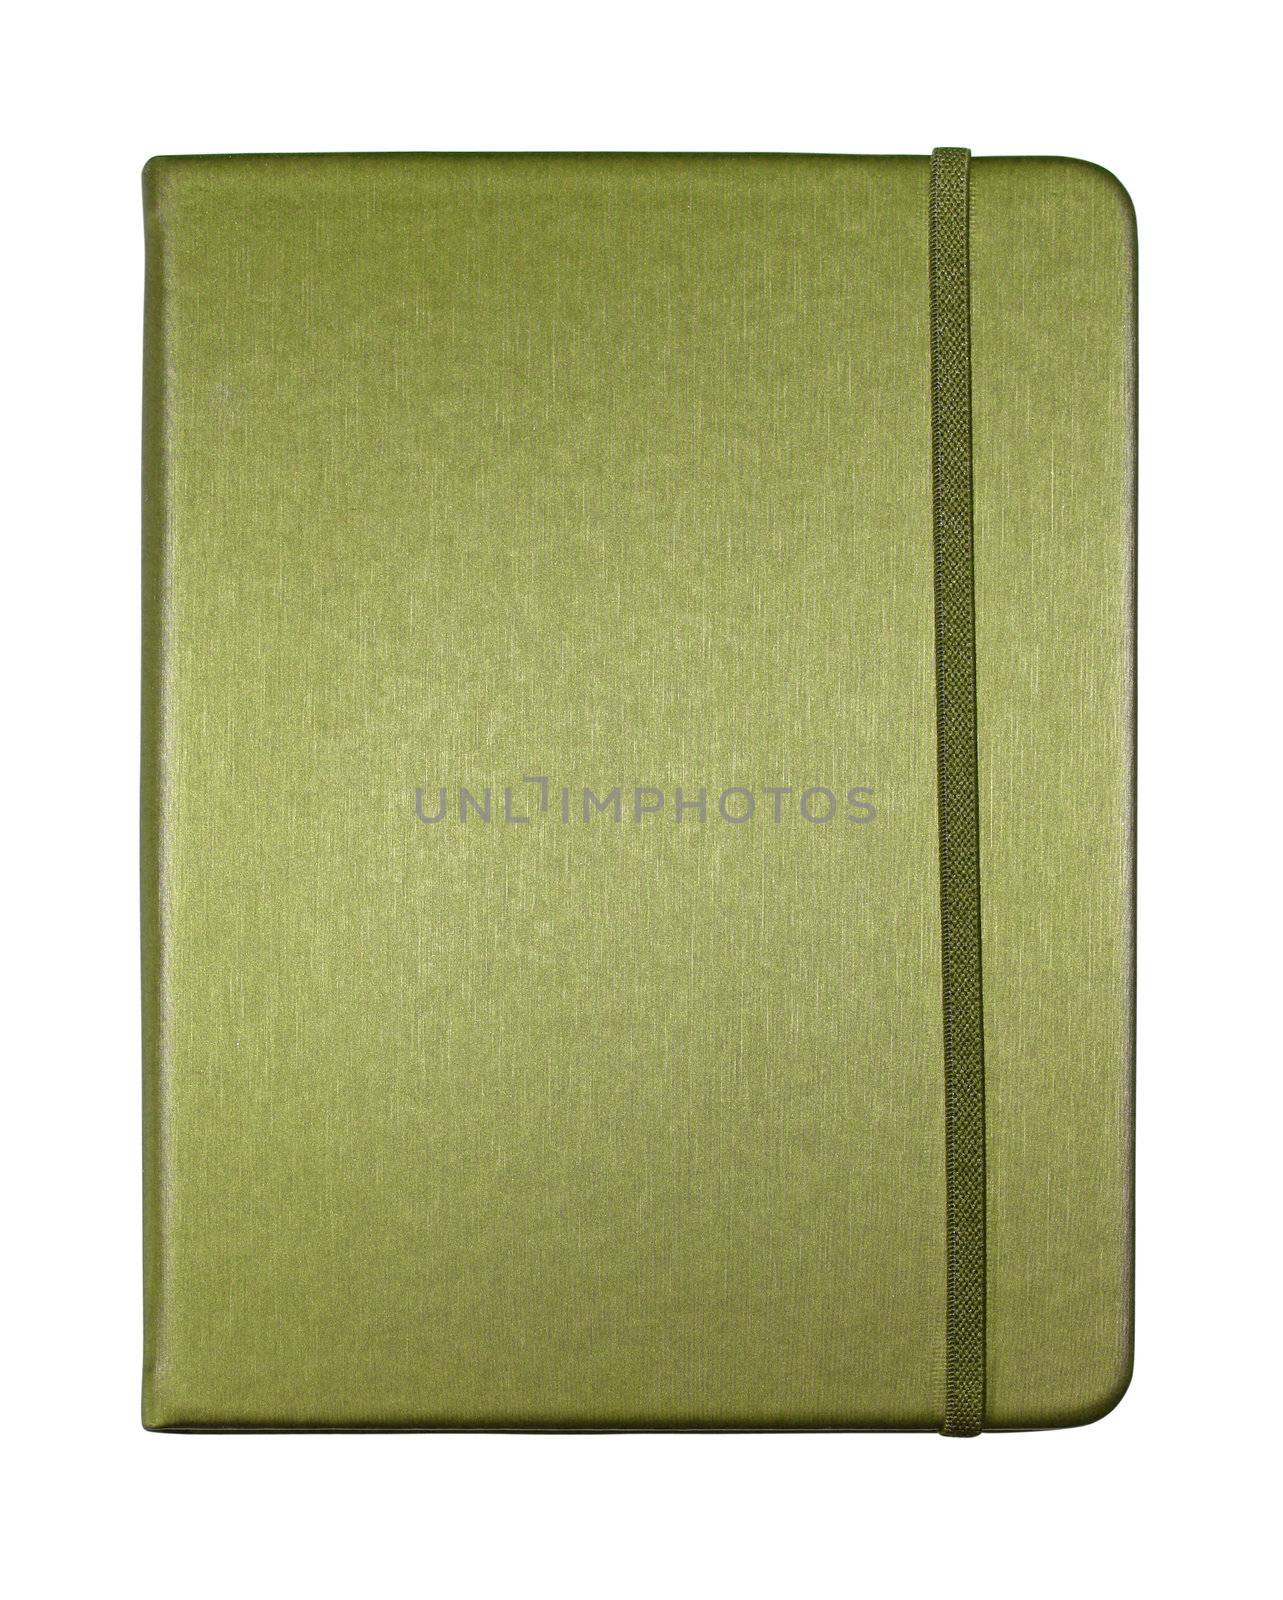 silk green color cover note book isolated on white background by nuchylee